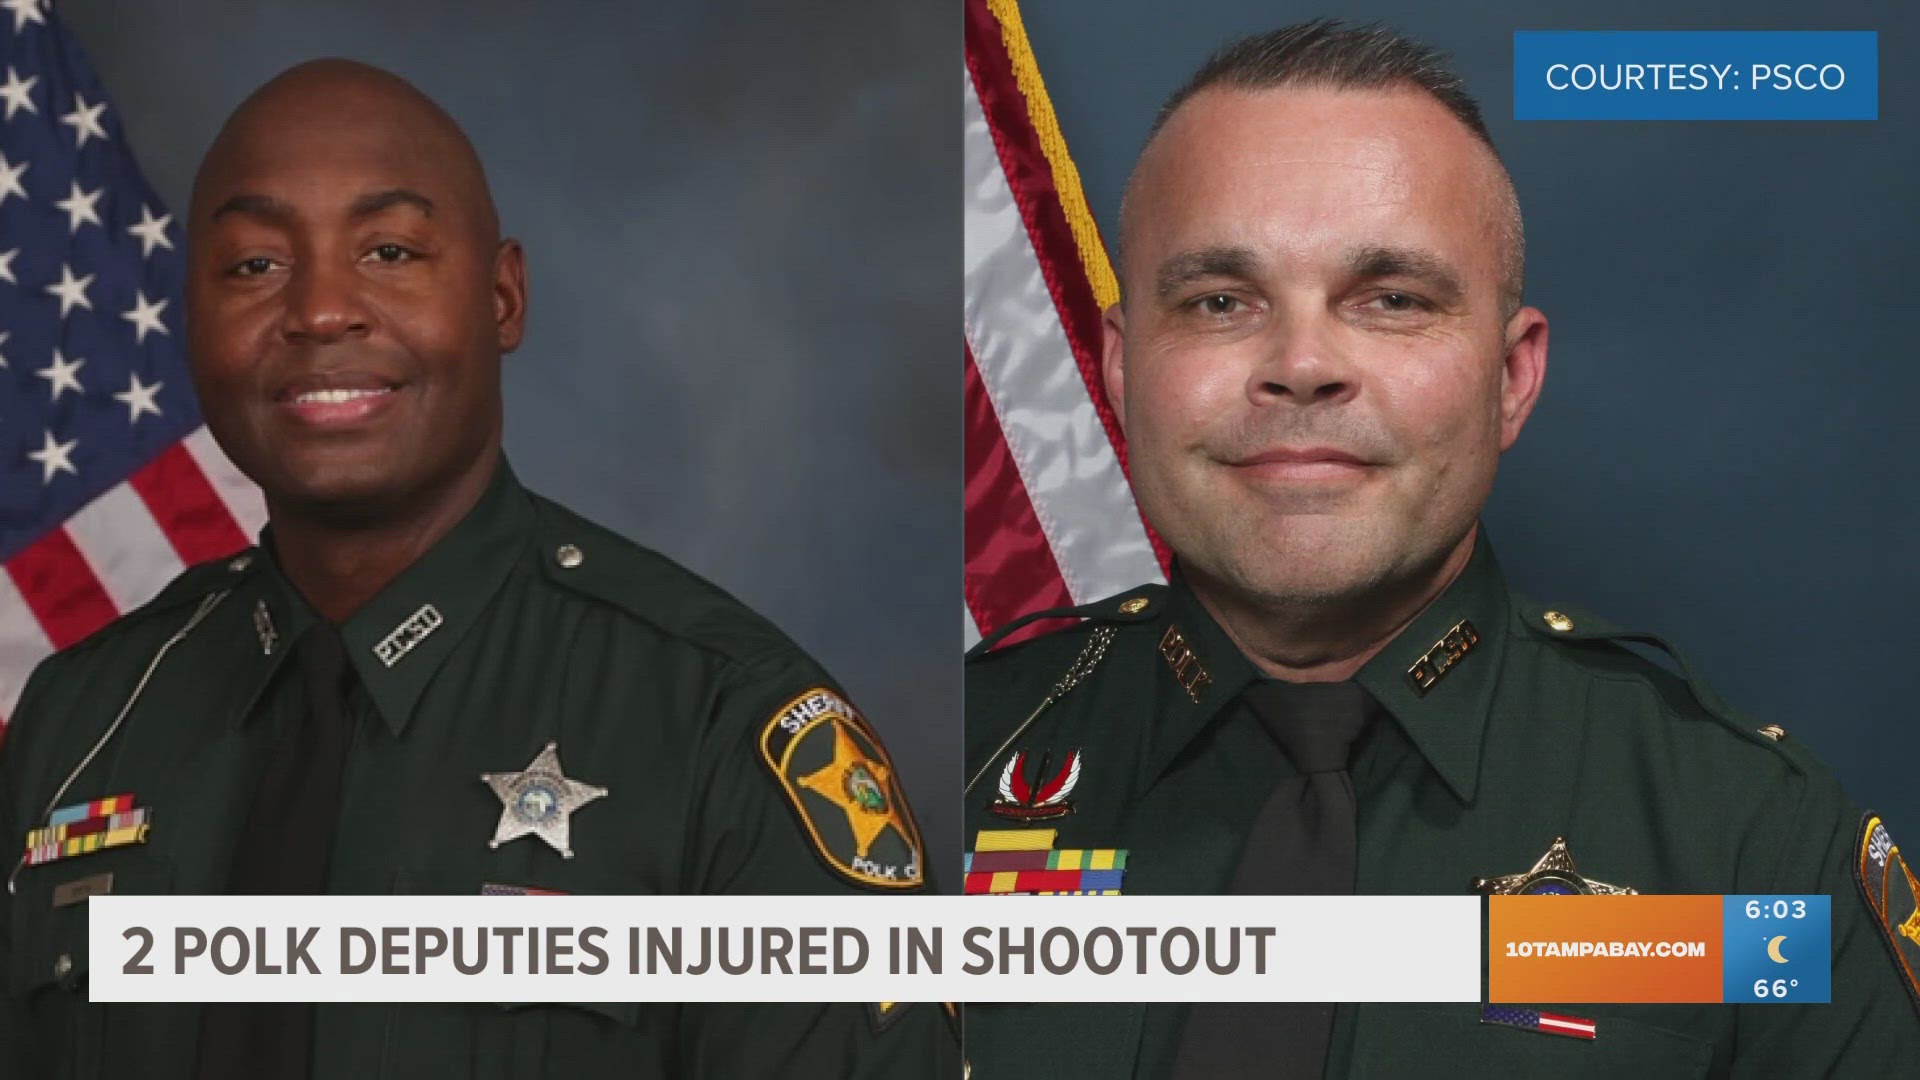 The sheriff's office said the deputies were confronting the driver of a car that was parked in an area after hours when the shooting started.